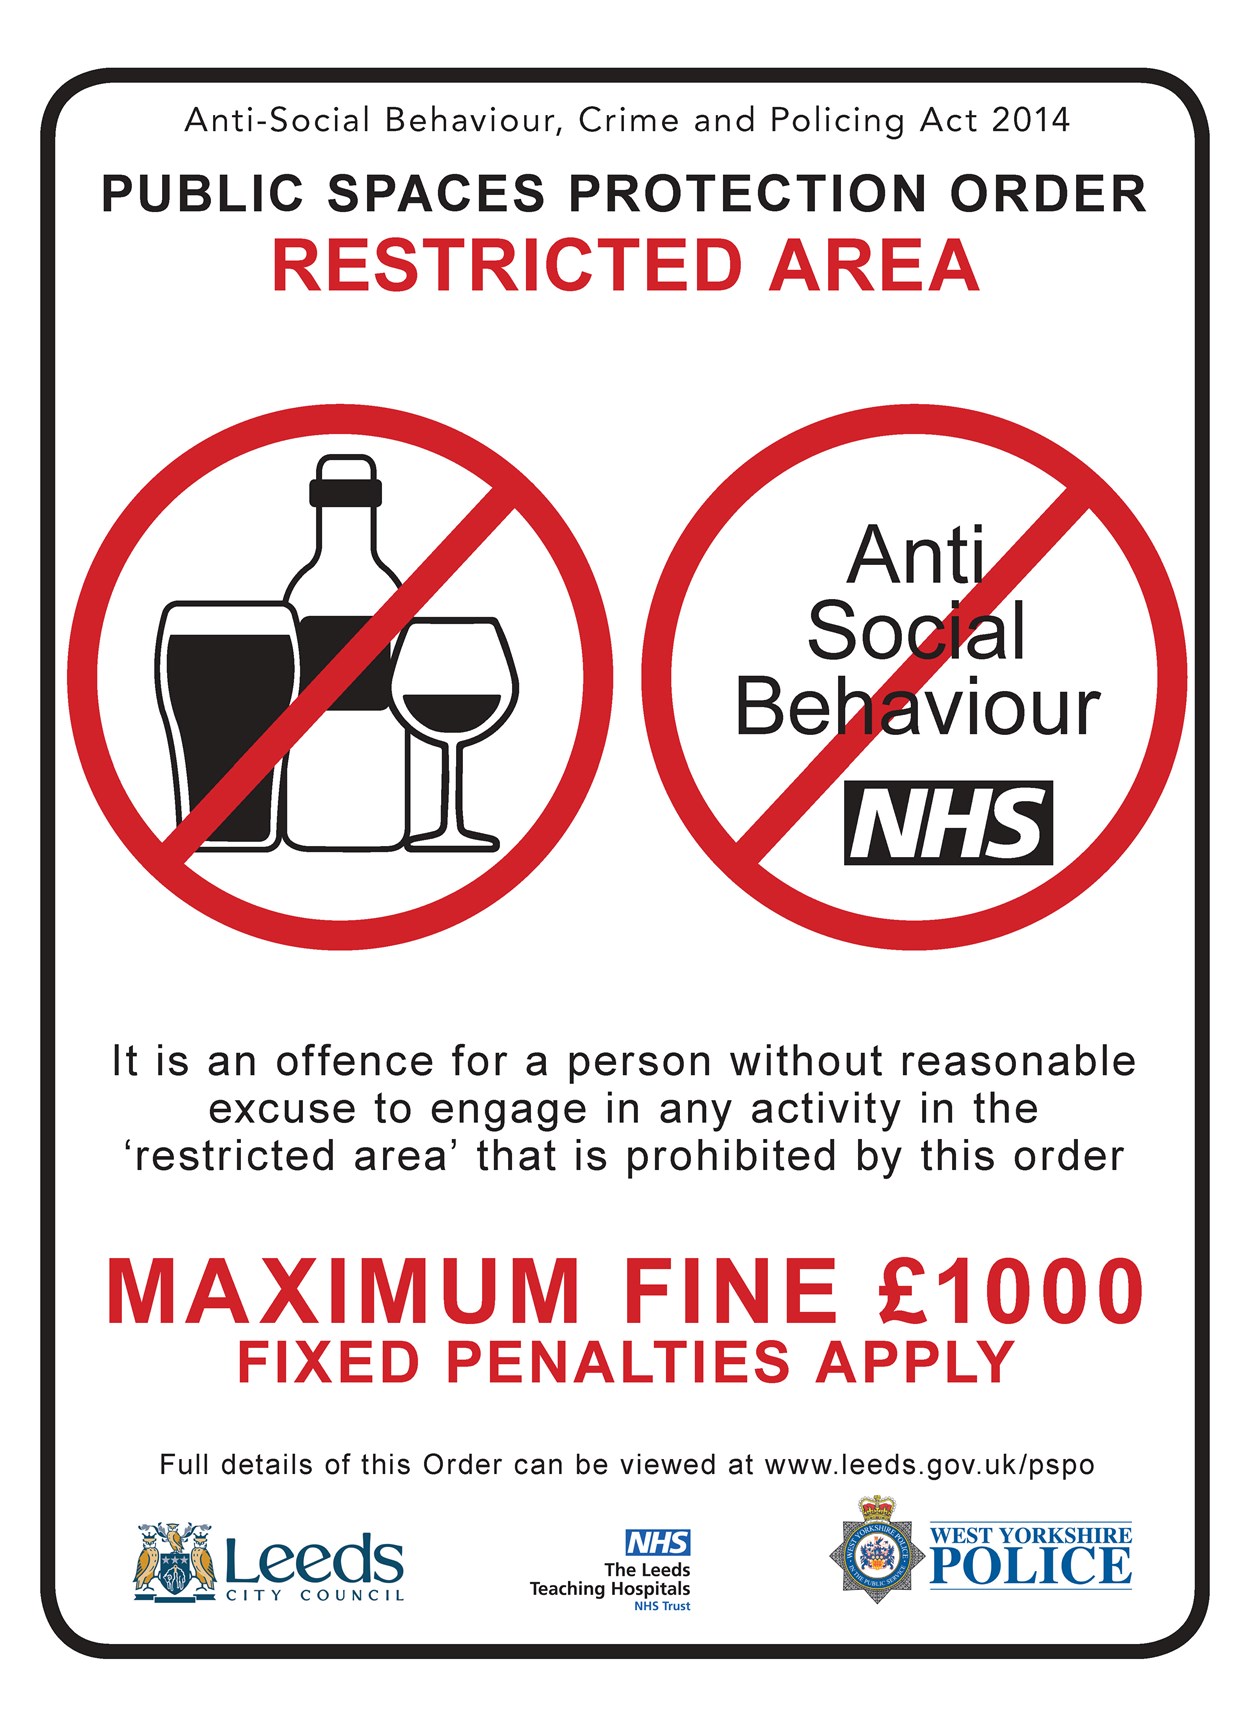 PSPO St James Hospital: A PSPO can be put in place to tackle a range of different anti-social behaviour issues in communities. This includes as highlighted in this particular sign, restricting the drinking of alcohol in public spaces and tackling anti-social behaviour in and around St James’s University Hospital.